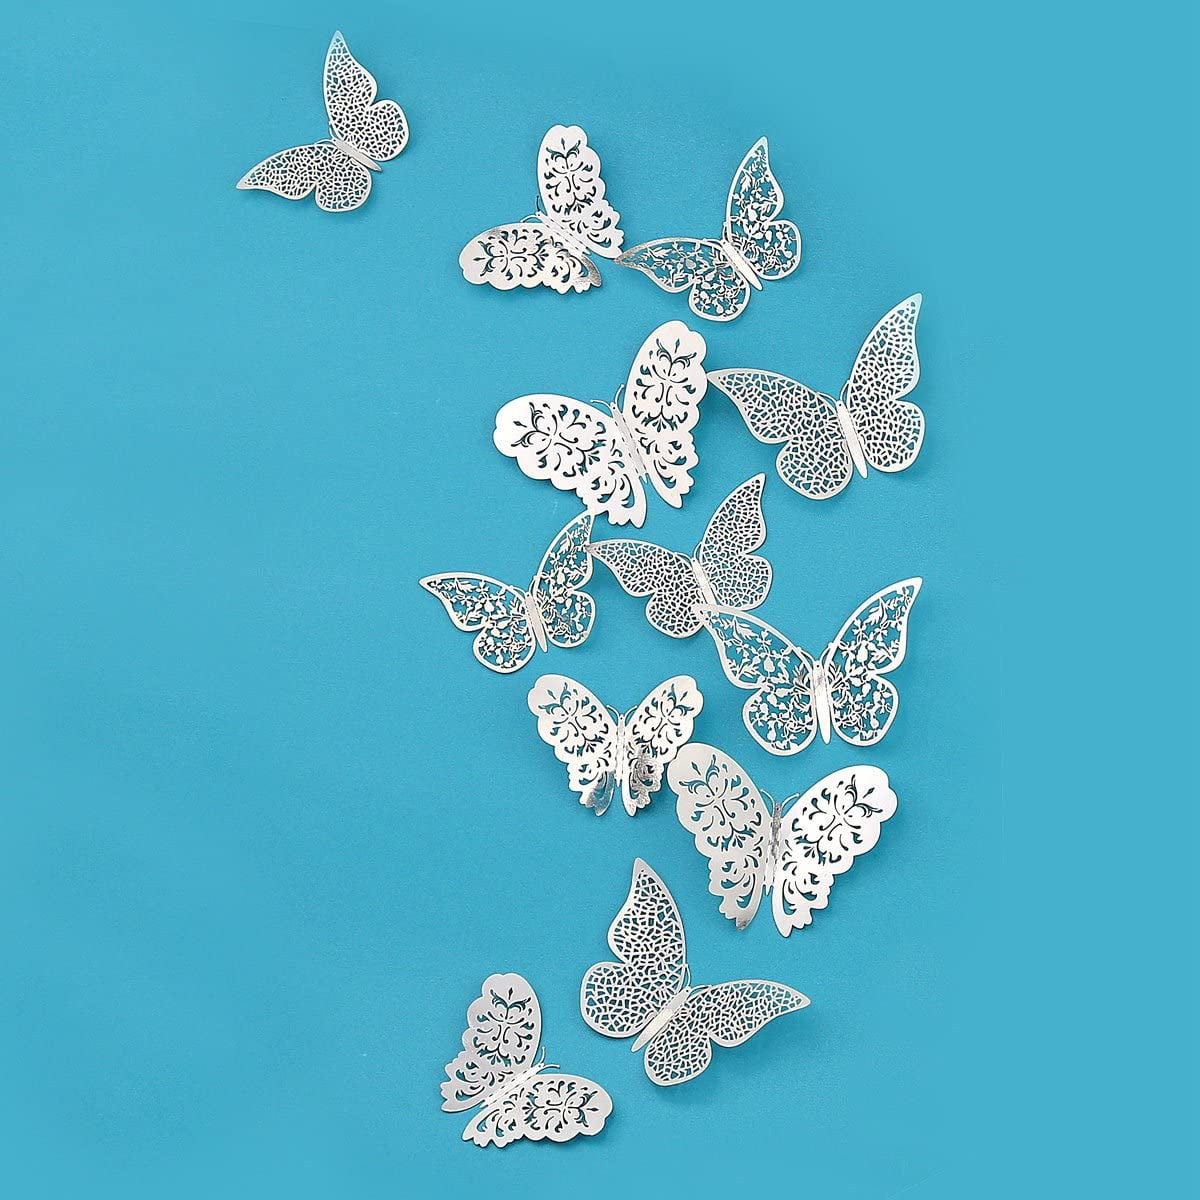 3D Teal Butterfly Shining Metallic Glittering Paper Wall Decal Gadget Removable Mural Sticker Living Room Bedroom Sun Room Shop Window Nursery Decoration Theme Party